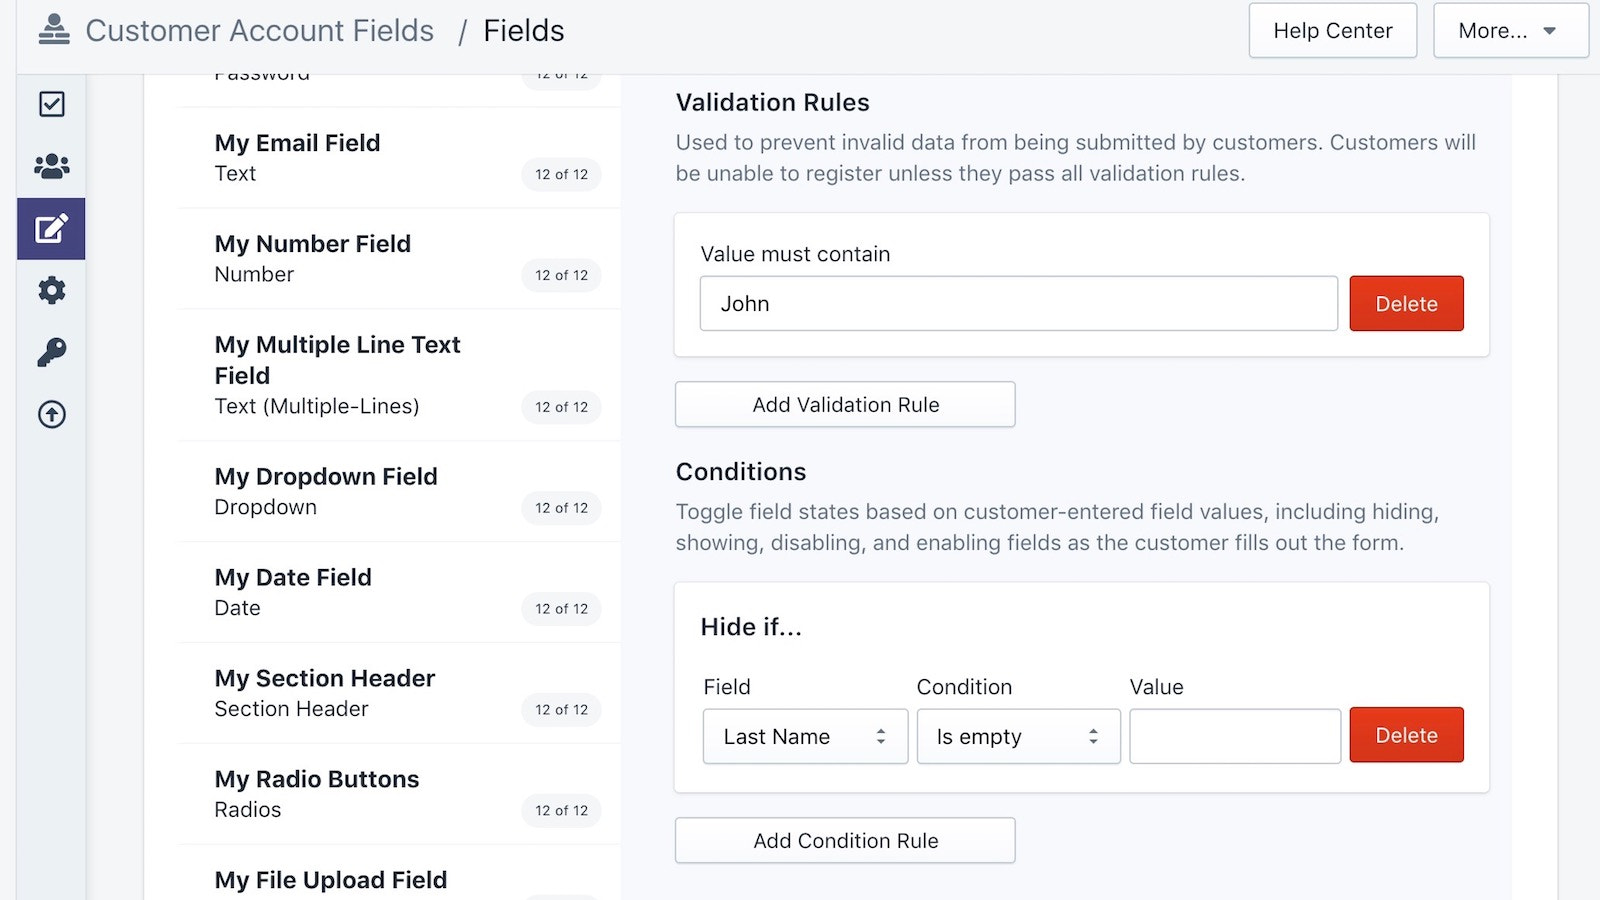 Validation and conditional rules